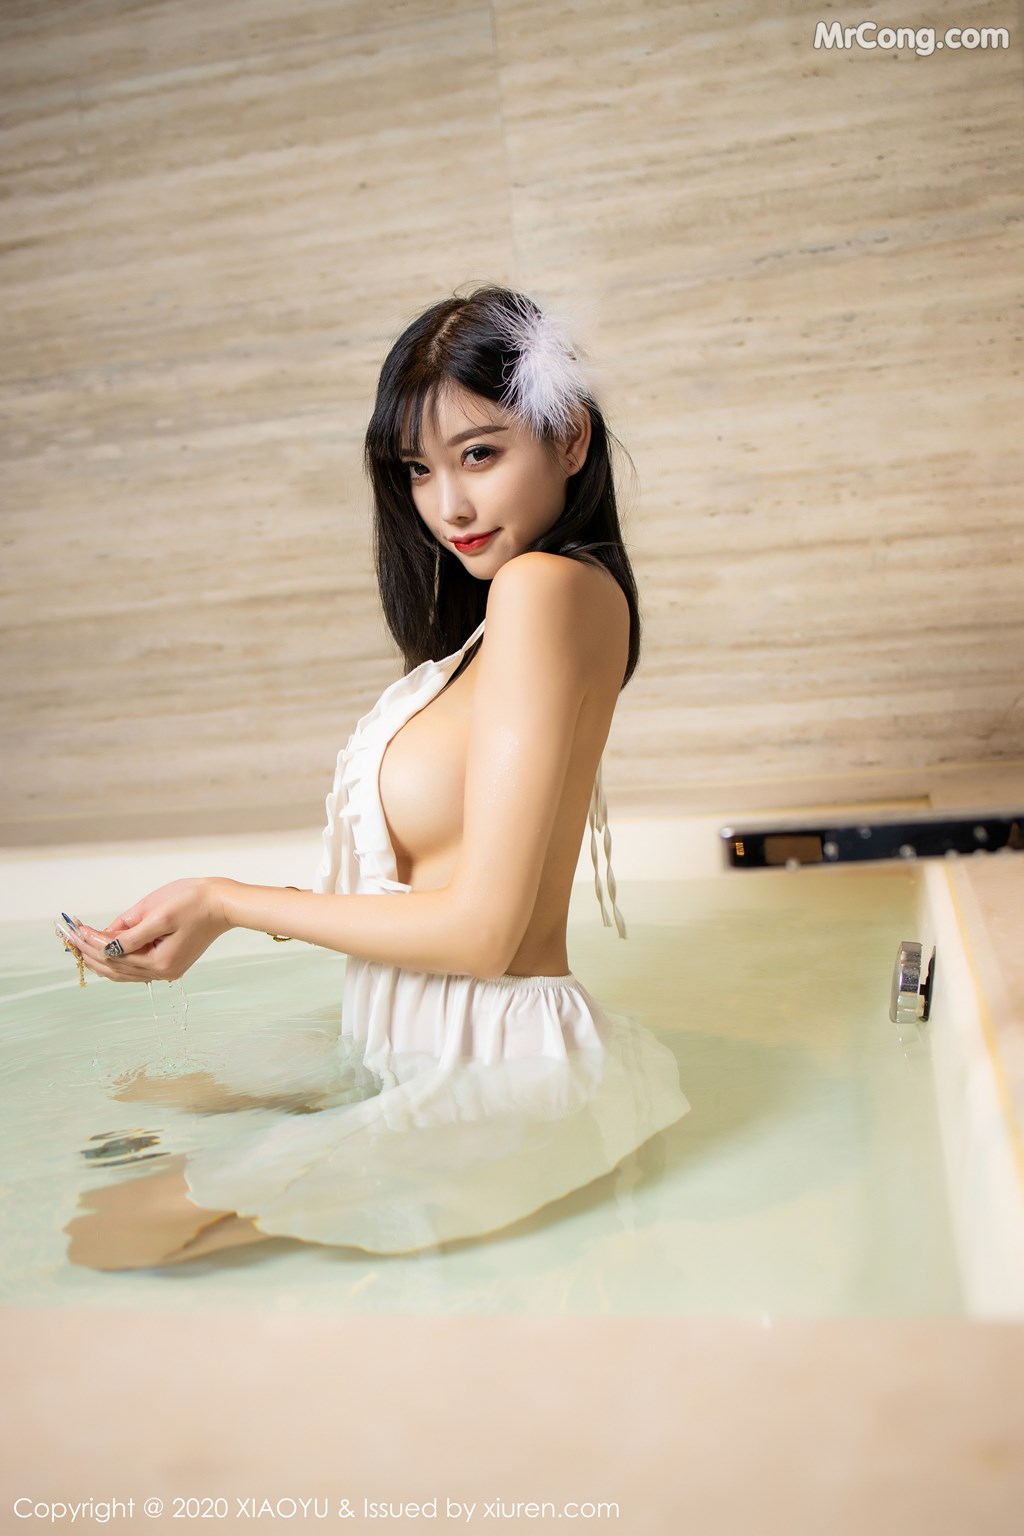 XiaoYu Vol. 234: Yang Chen Chen (杨晨晨 sugar) (65 pictures)